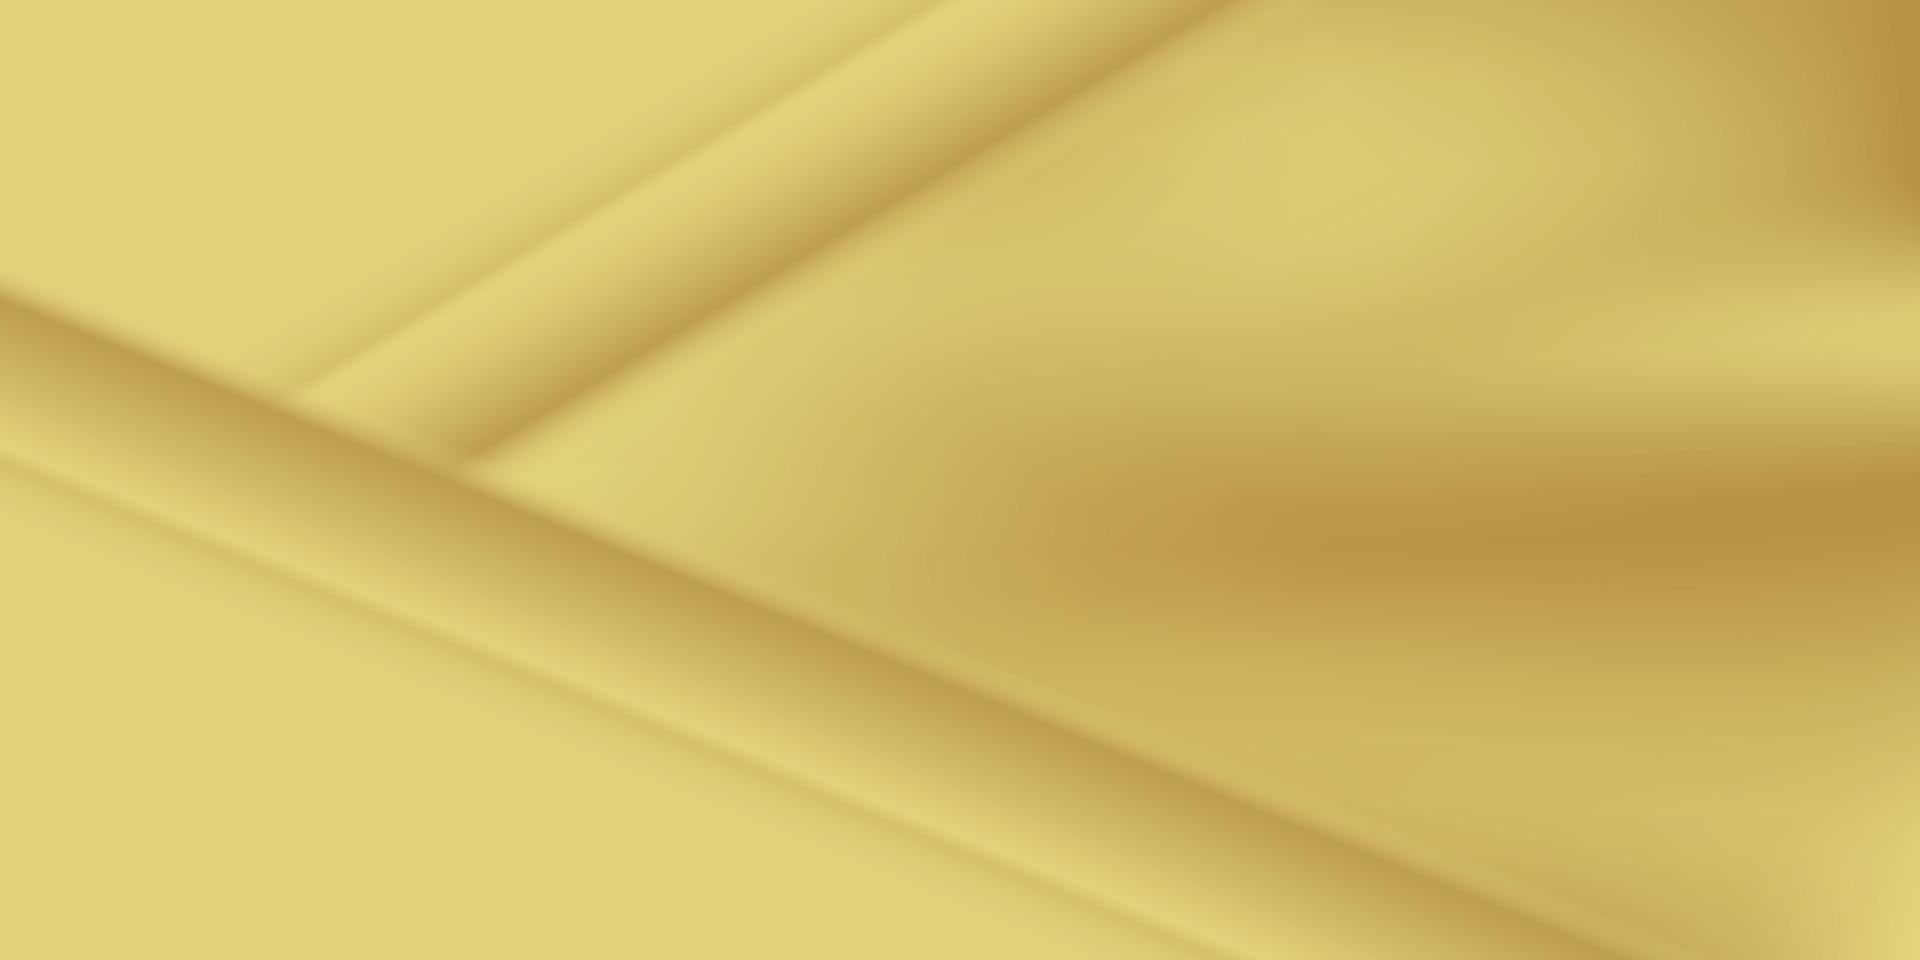 Gold abstract gradient background. Vector illustration.